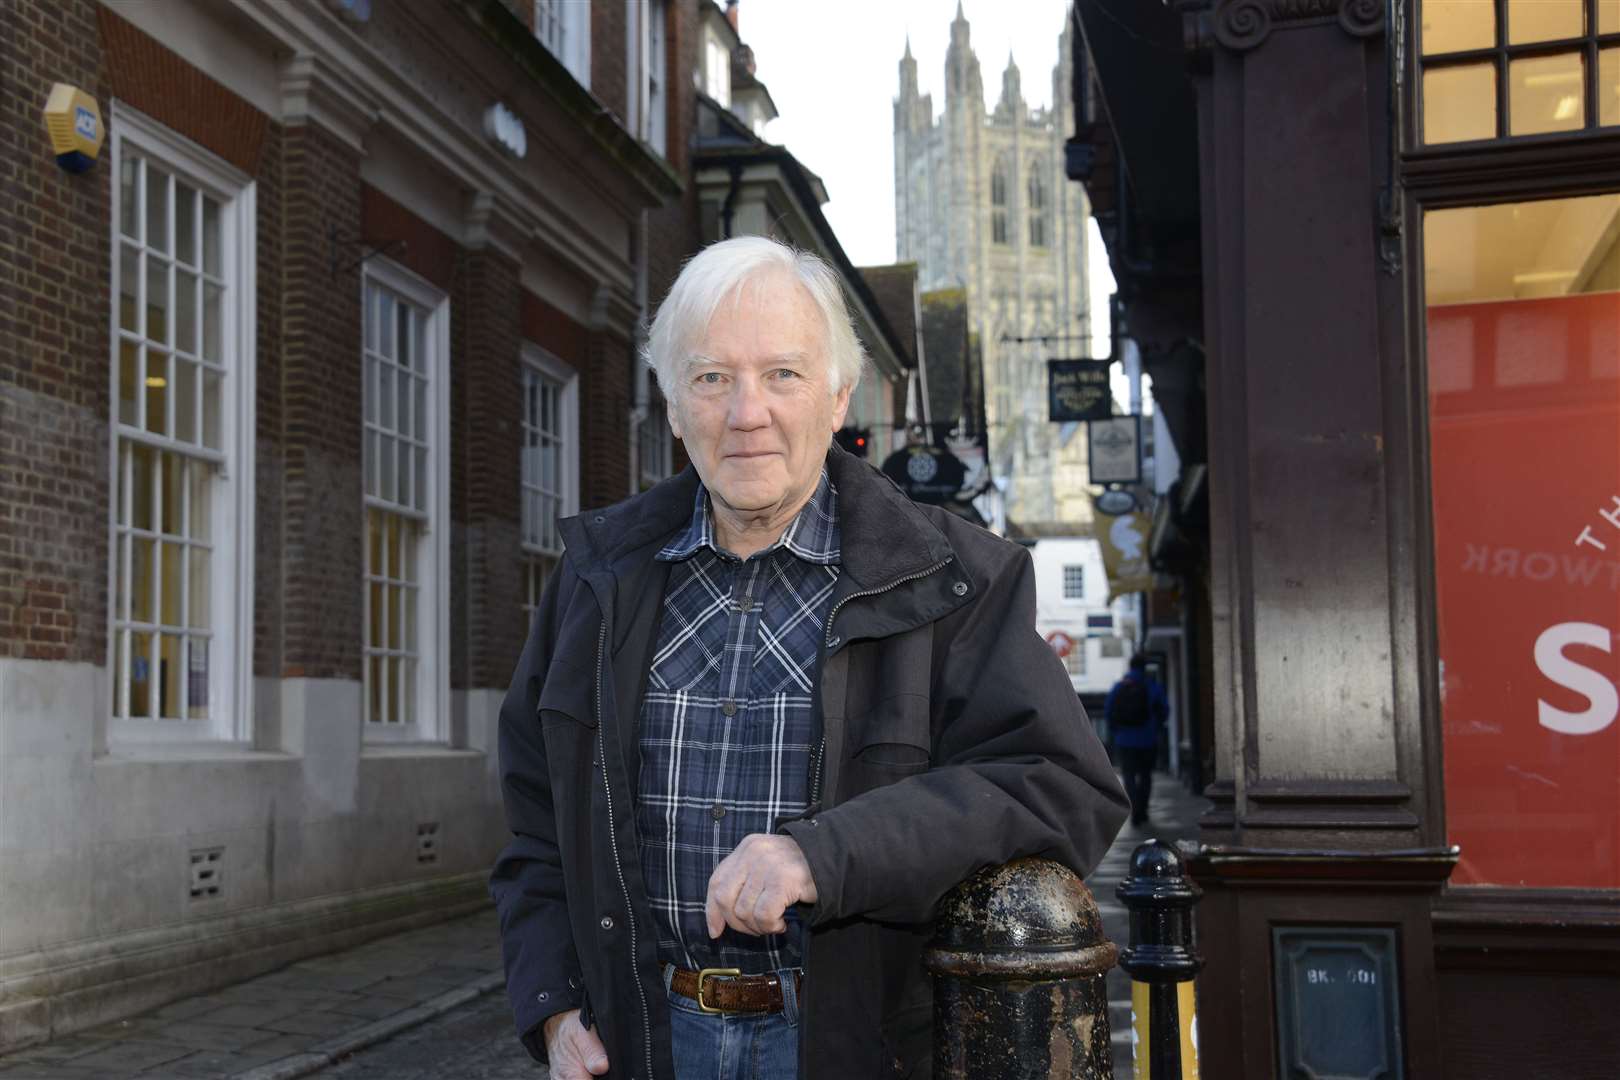 Cllr Michael Dixey in Canterbury city centre. Picture: Paul Amos